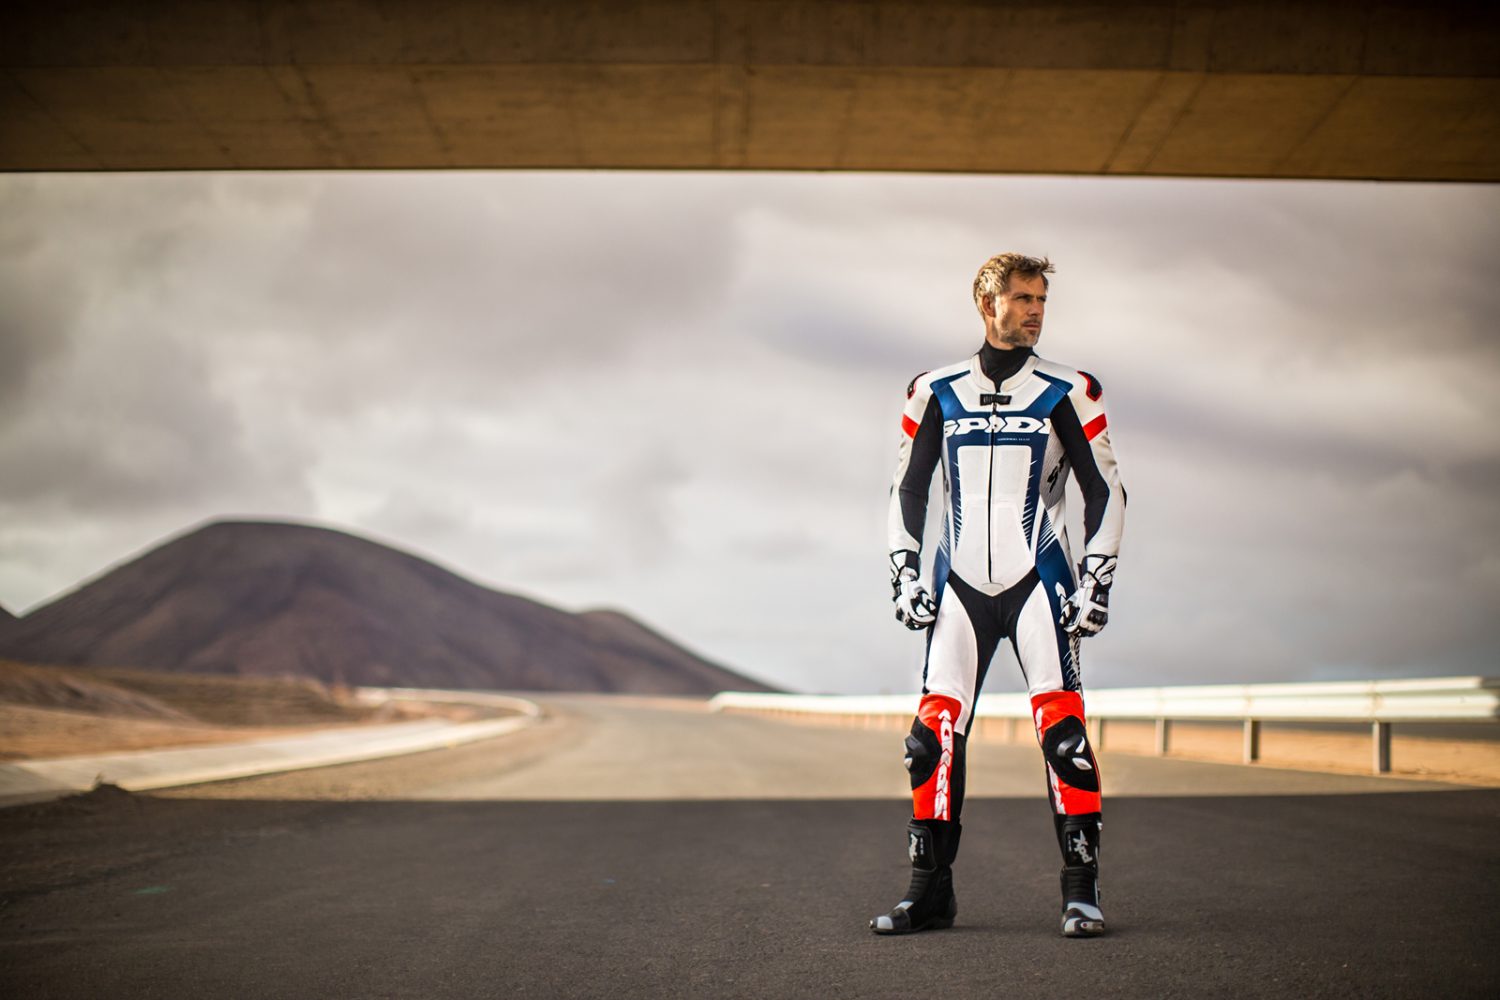 Spidi Track Wind Pro Racing Suit motorcycle leathers review